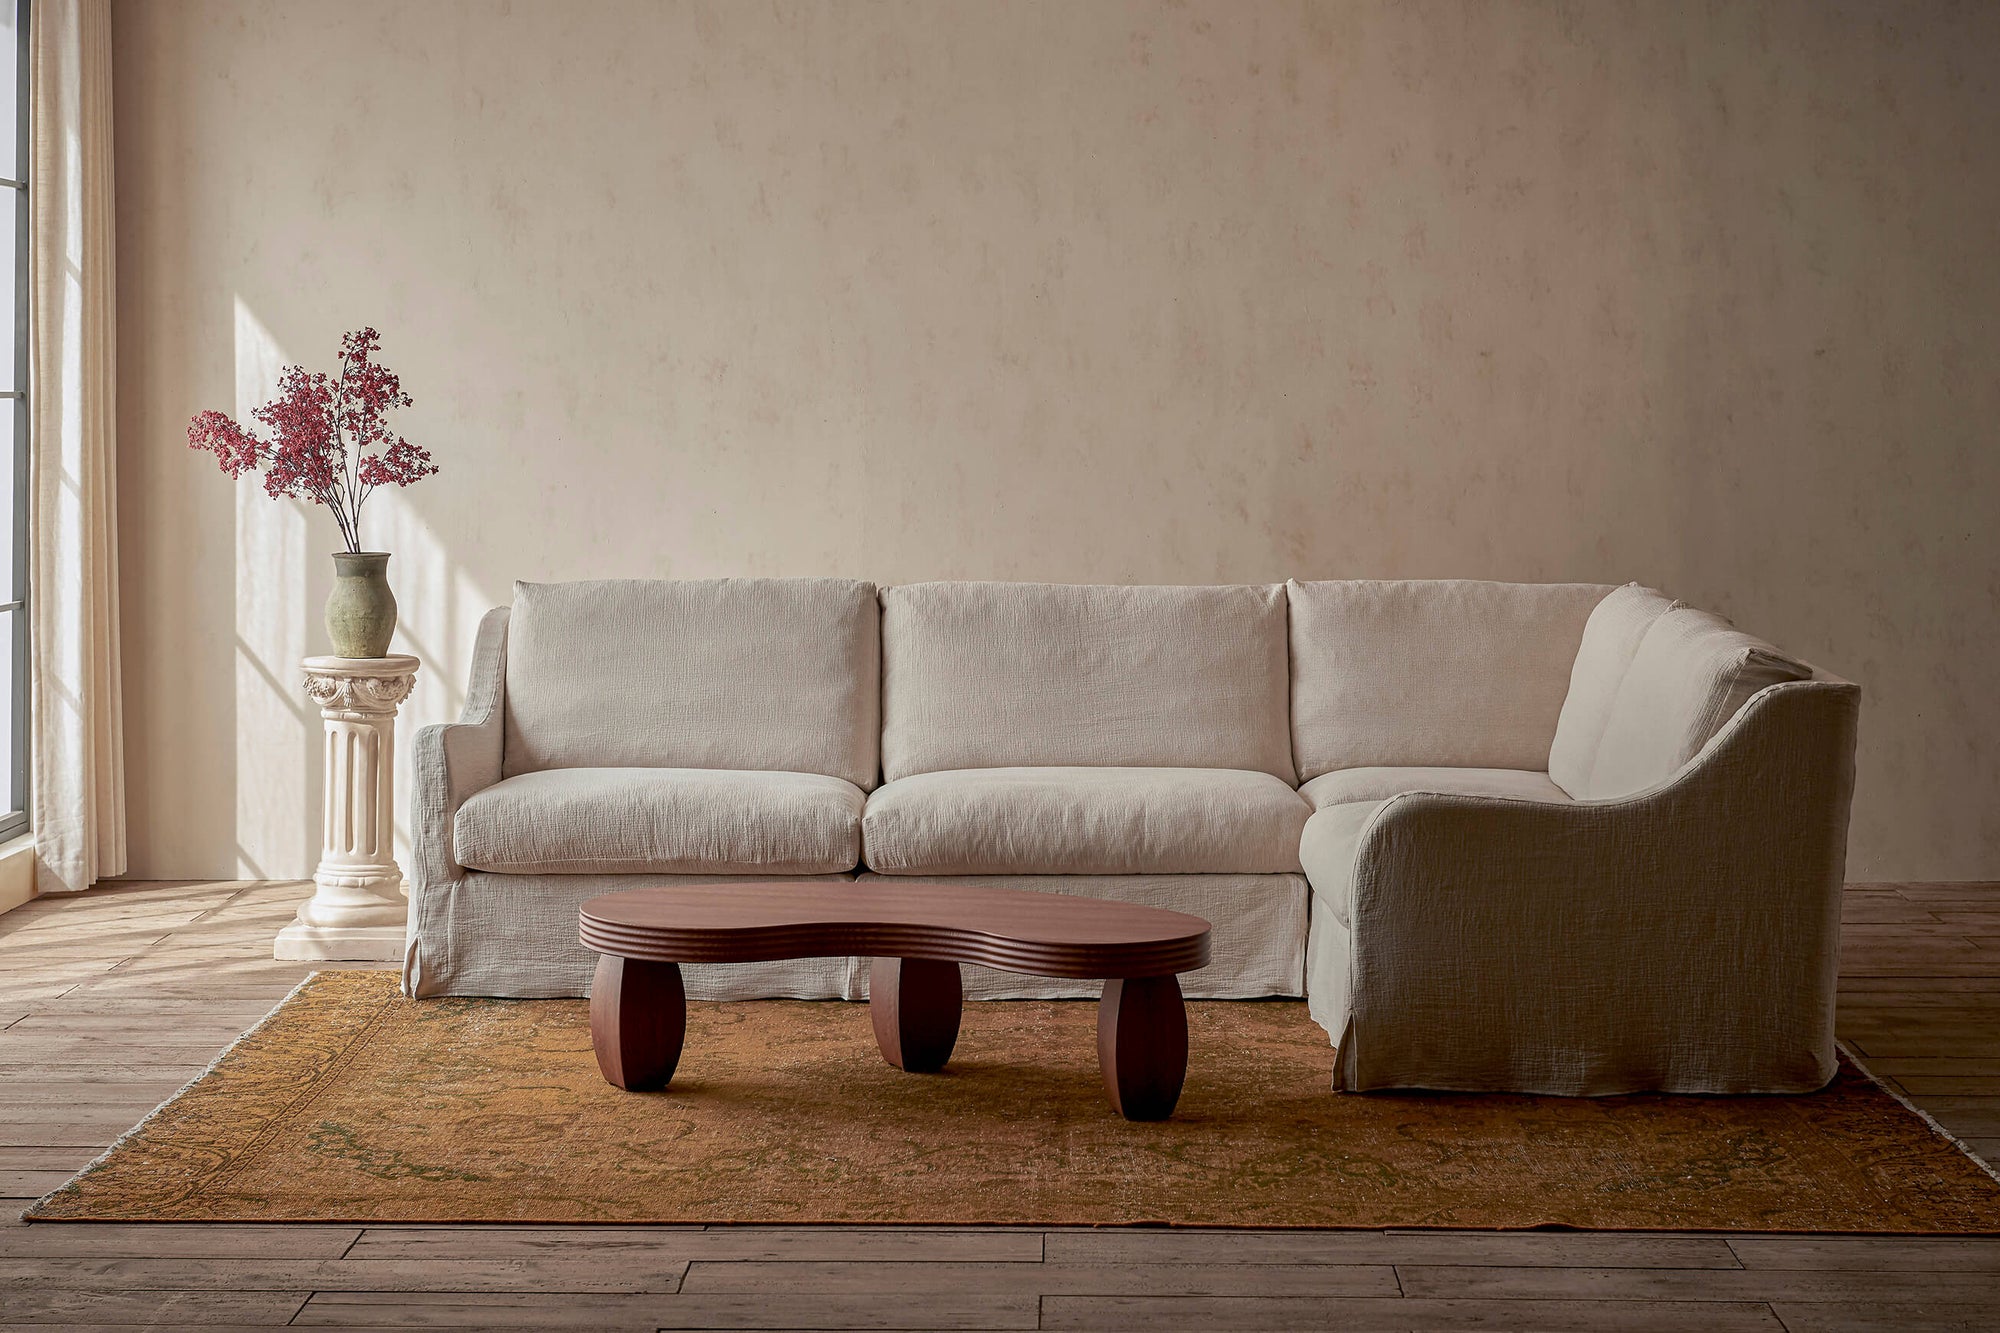 Esmé L-Shape Sectional Sofa in Corn Silk, a light beige Washed Cotton Linen, placed in a sunlit room alongside the PIsces Table